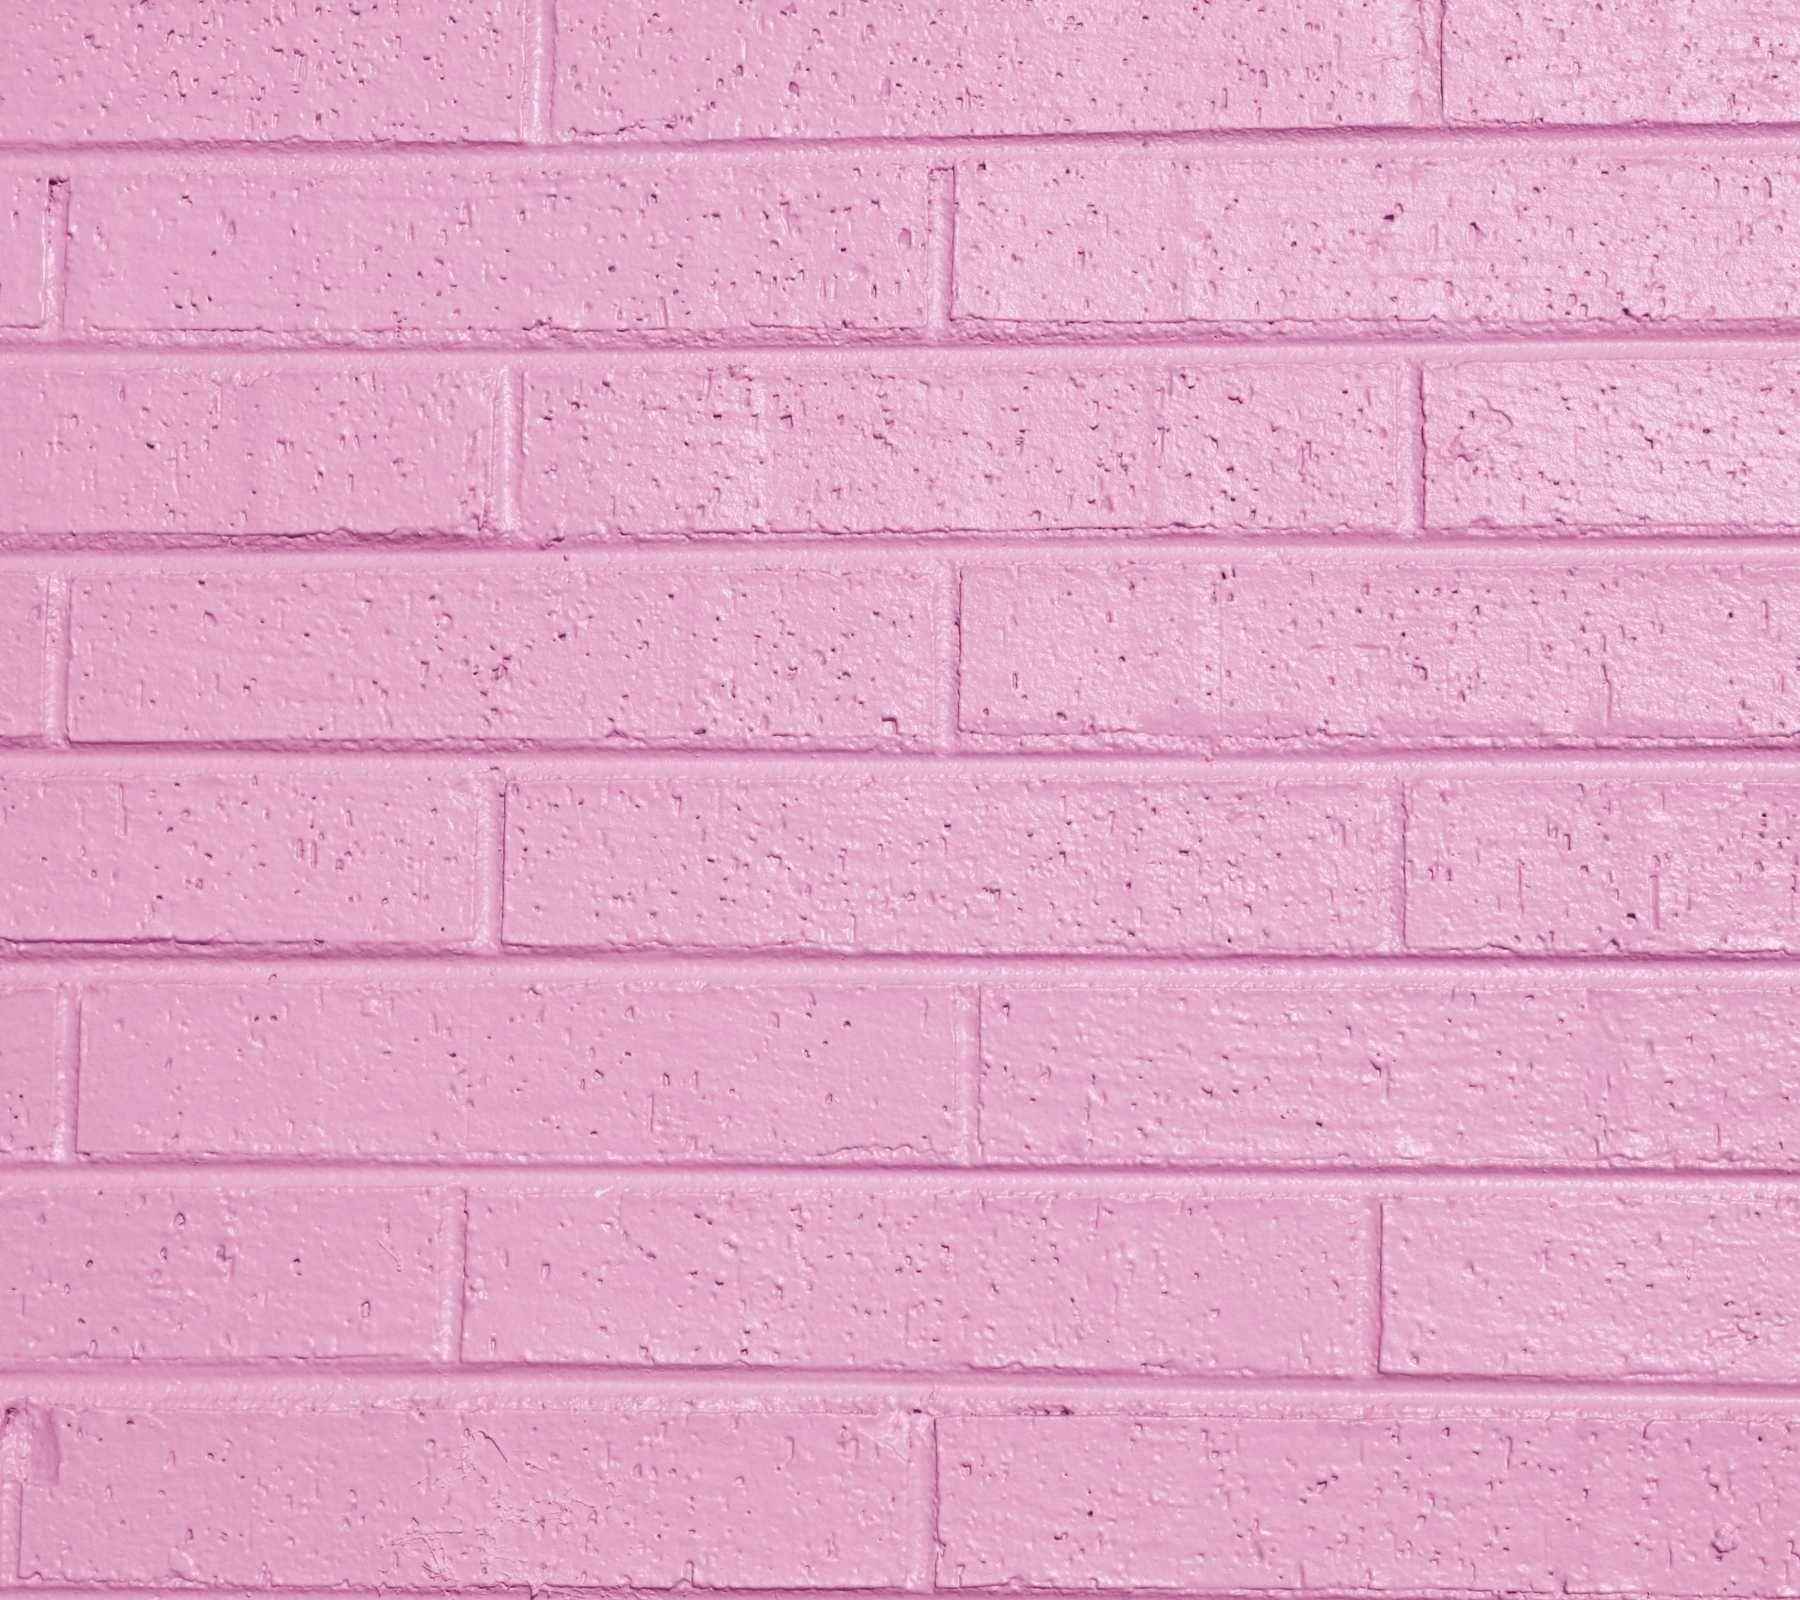 Pink Wallpaper iPhone Aesthetic Backgrounds - AnjaHome